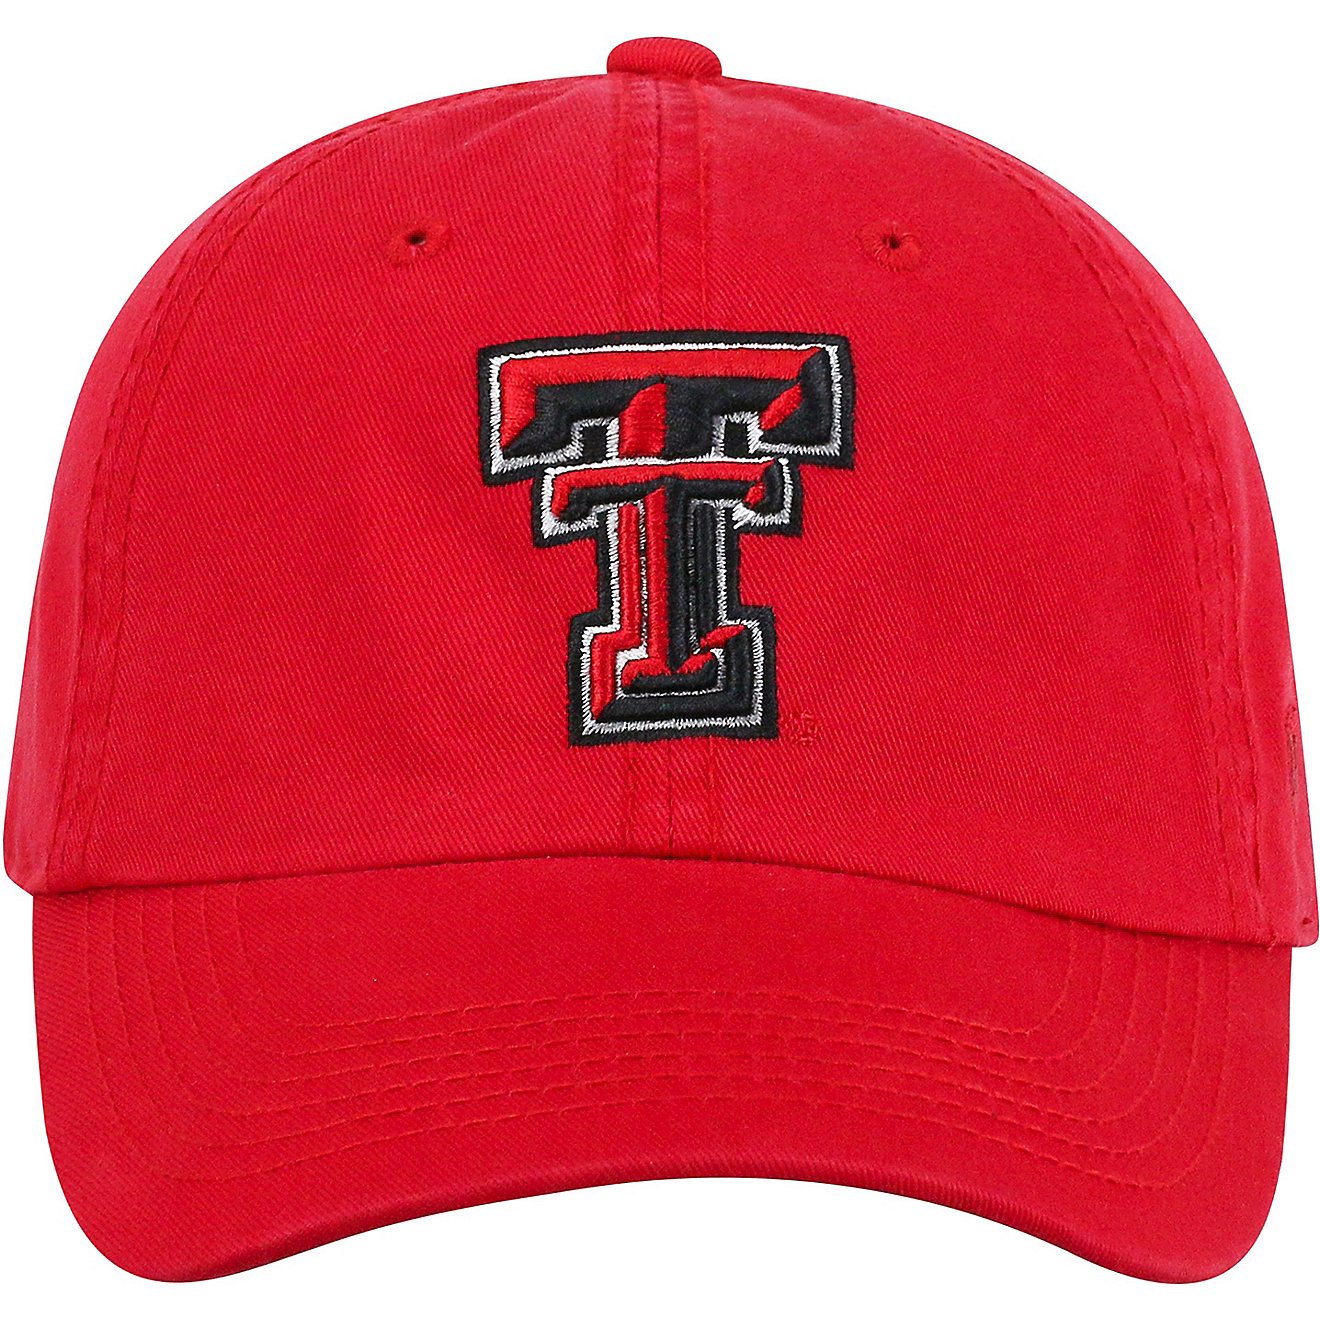 Top of the World Adults' Texas Tech University Crew Adjustable Team Color Cap                                                    - view number 3